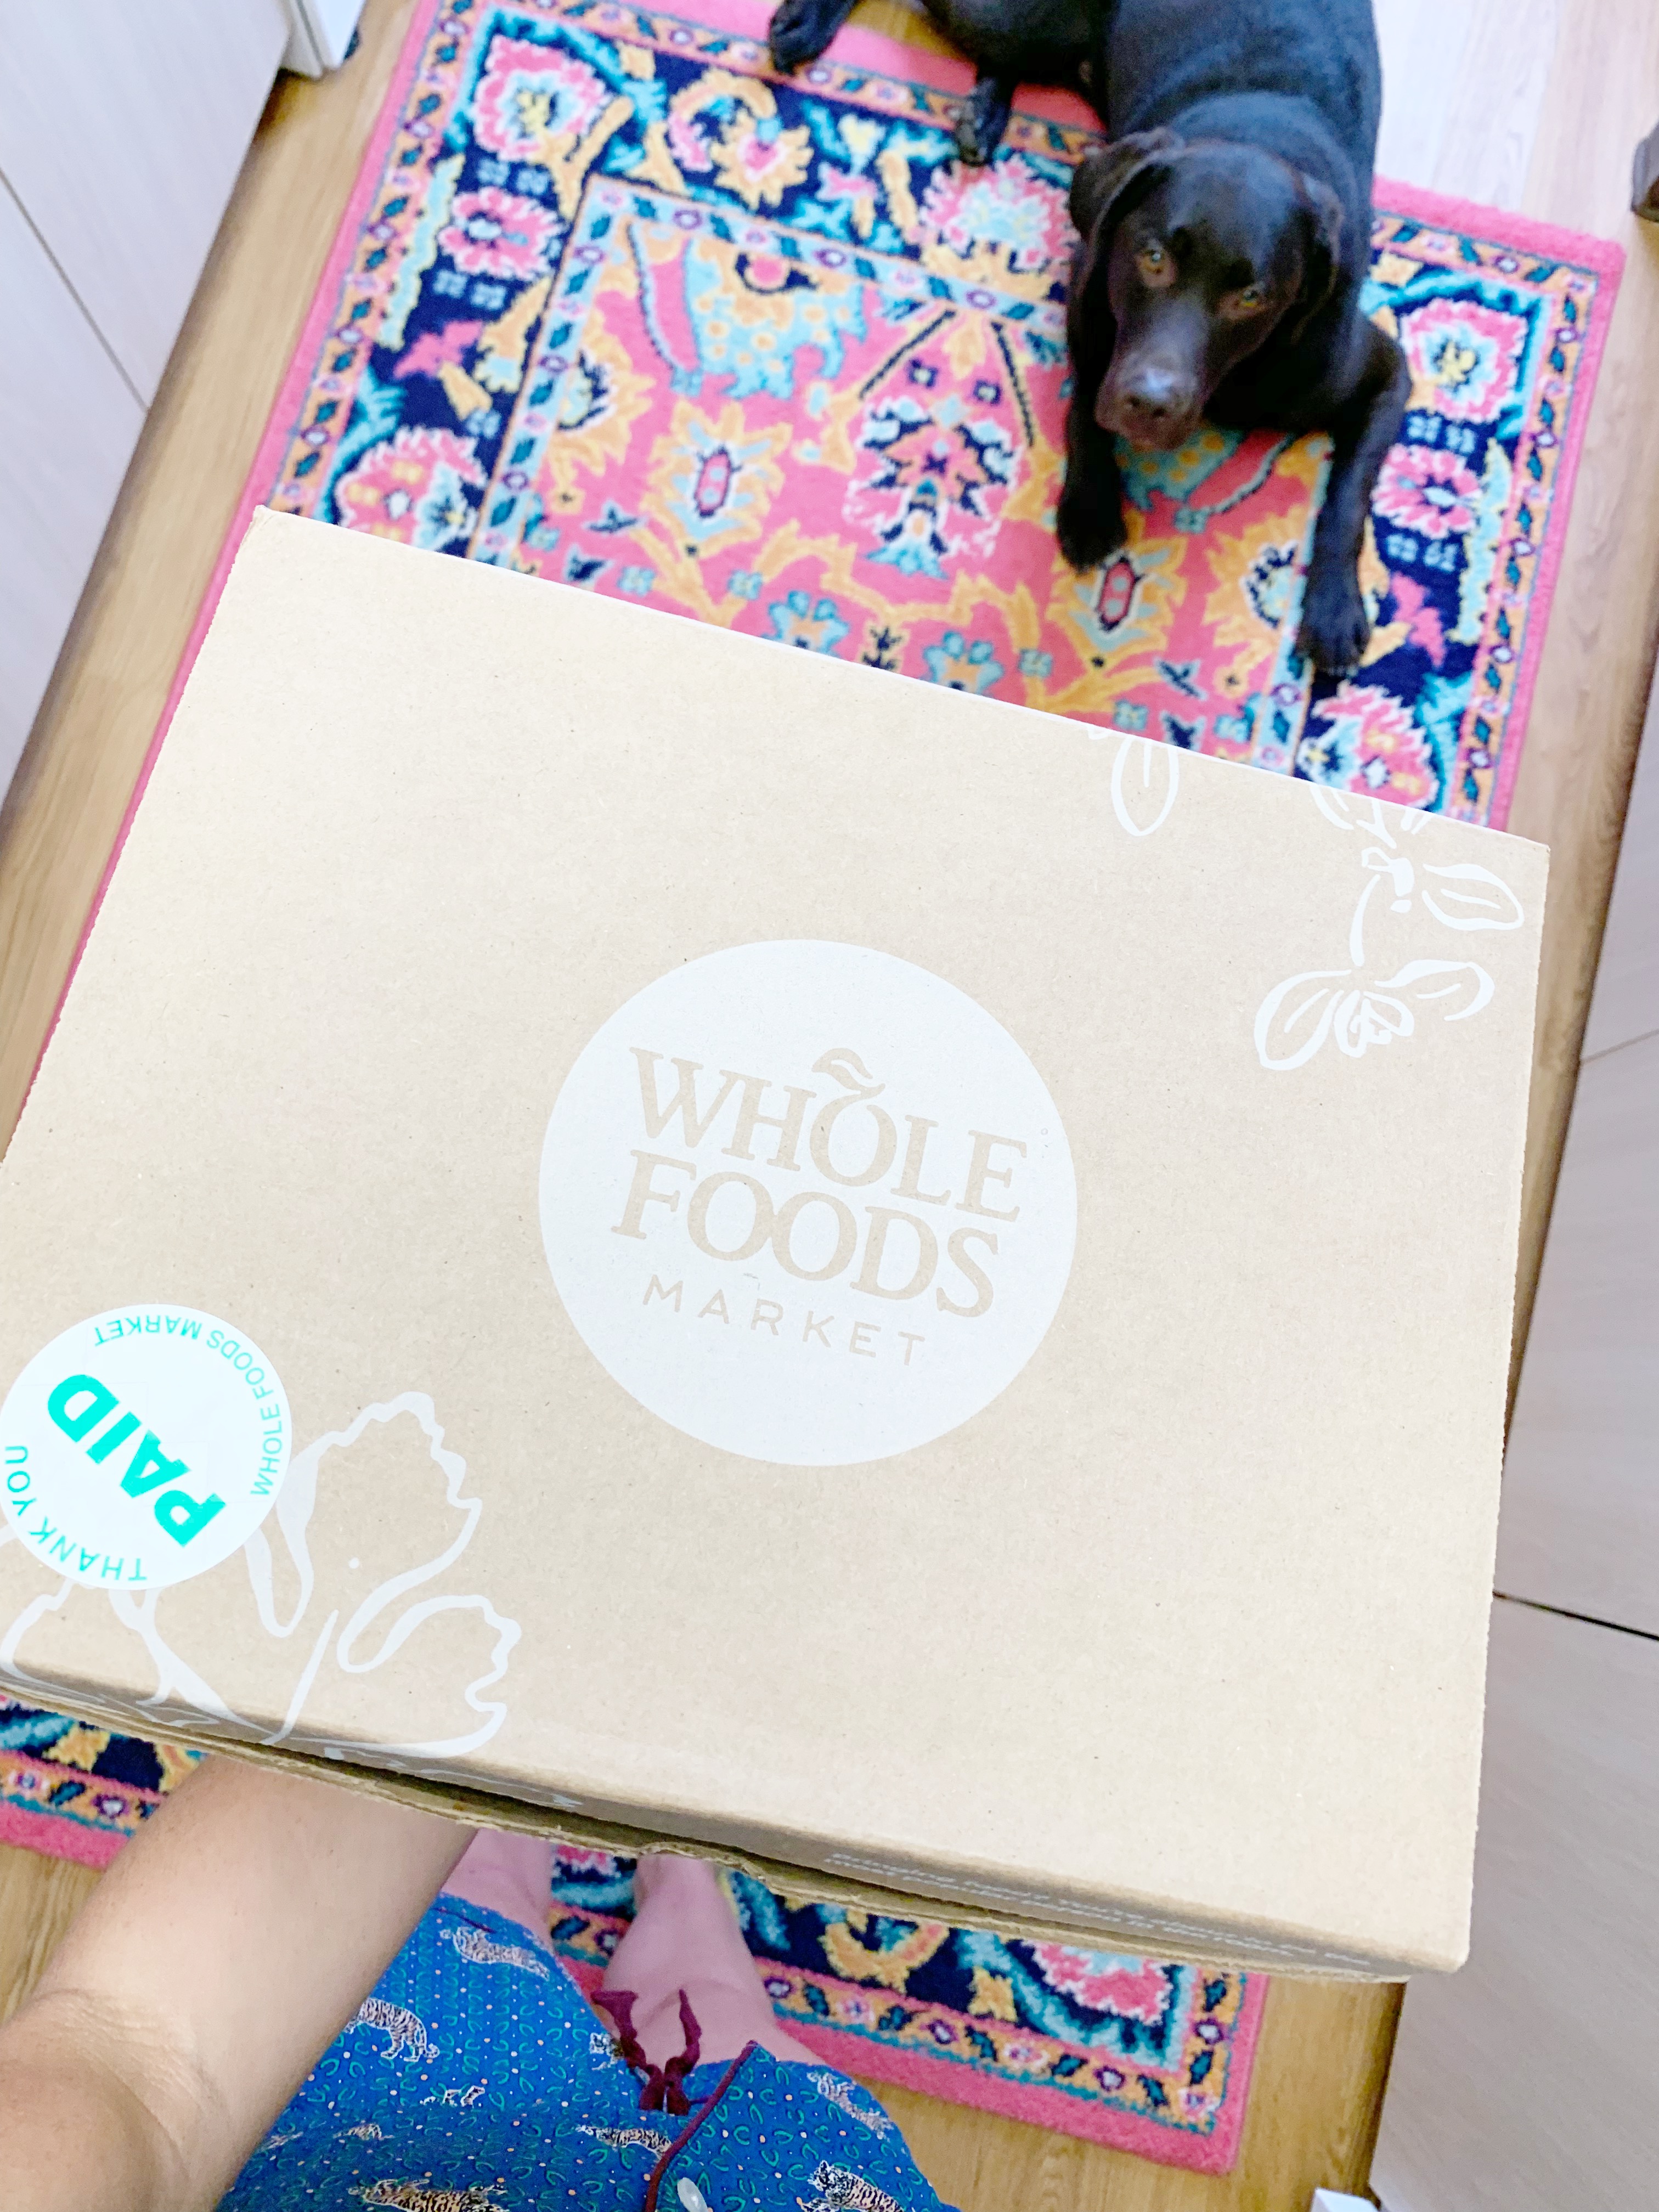 We Ordered Thanksgiving Dinner From Whole Foods...Here's How That Went | Whole Foods Thanksgiving Dinner - Whole Foods Thanksgiving Order - Ordering Thanksgiving Dinner From Whole Foods Review